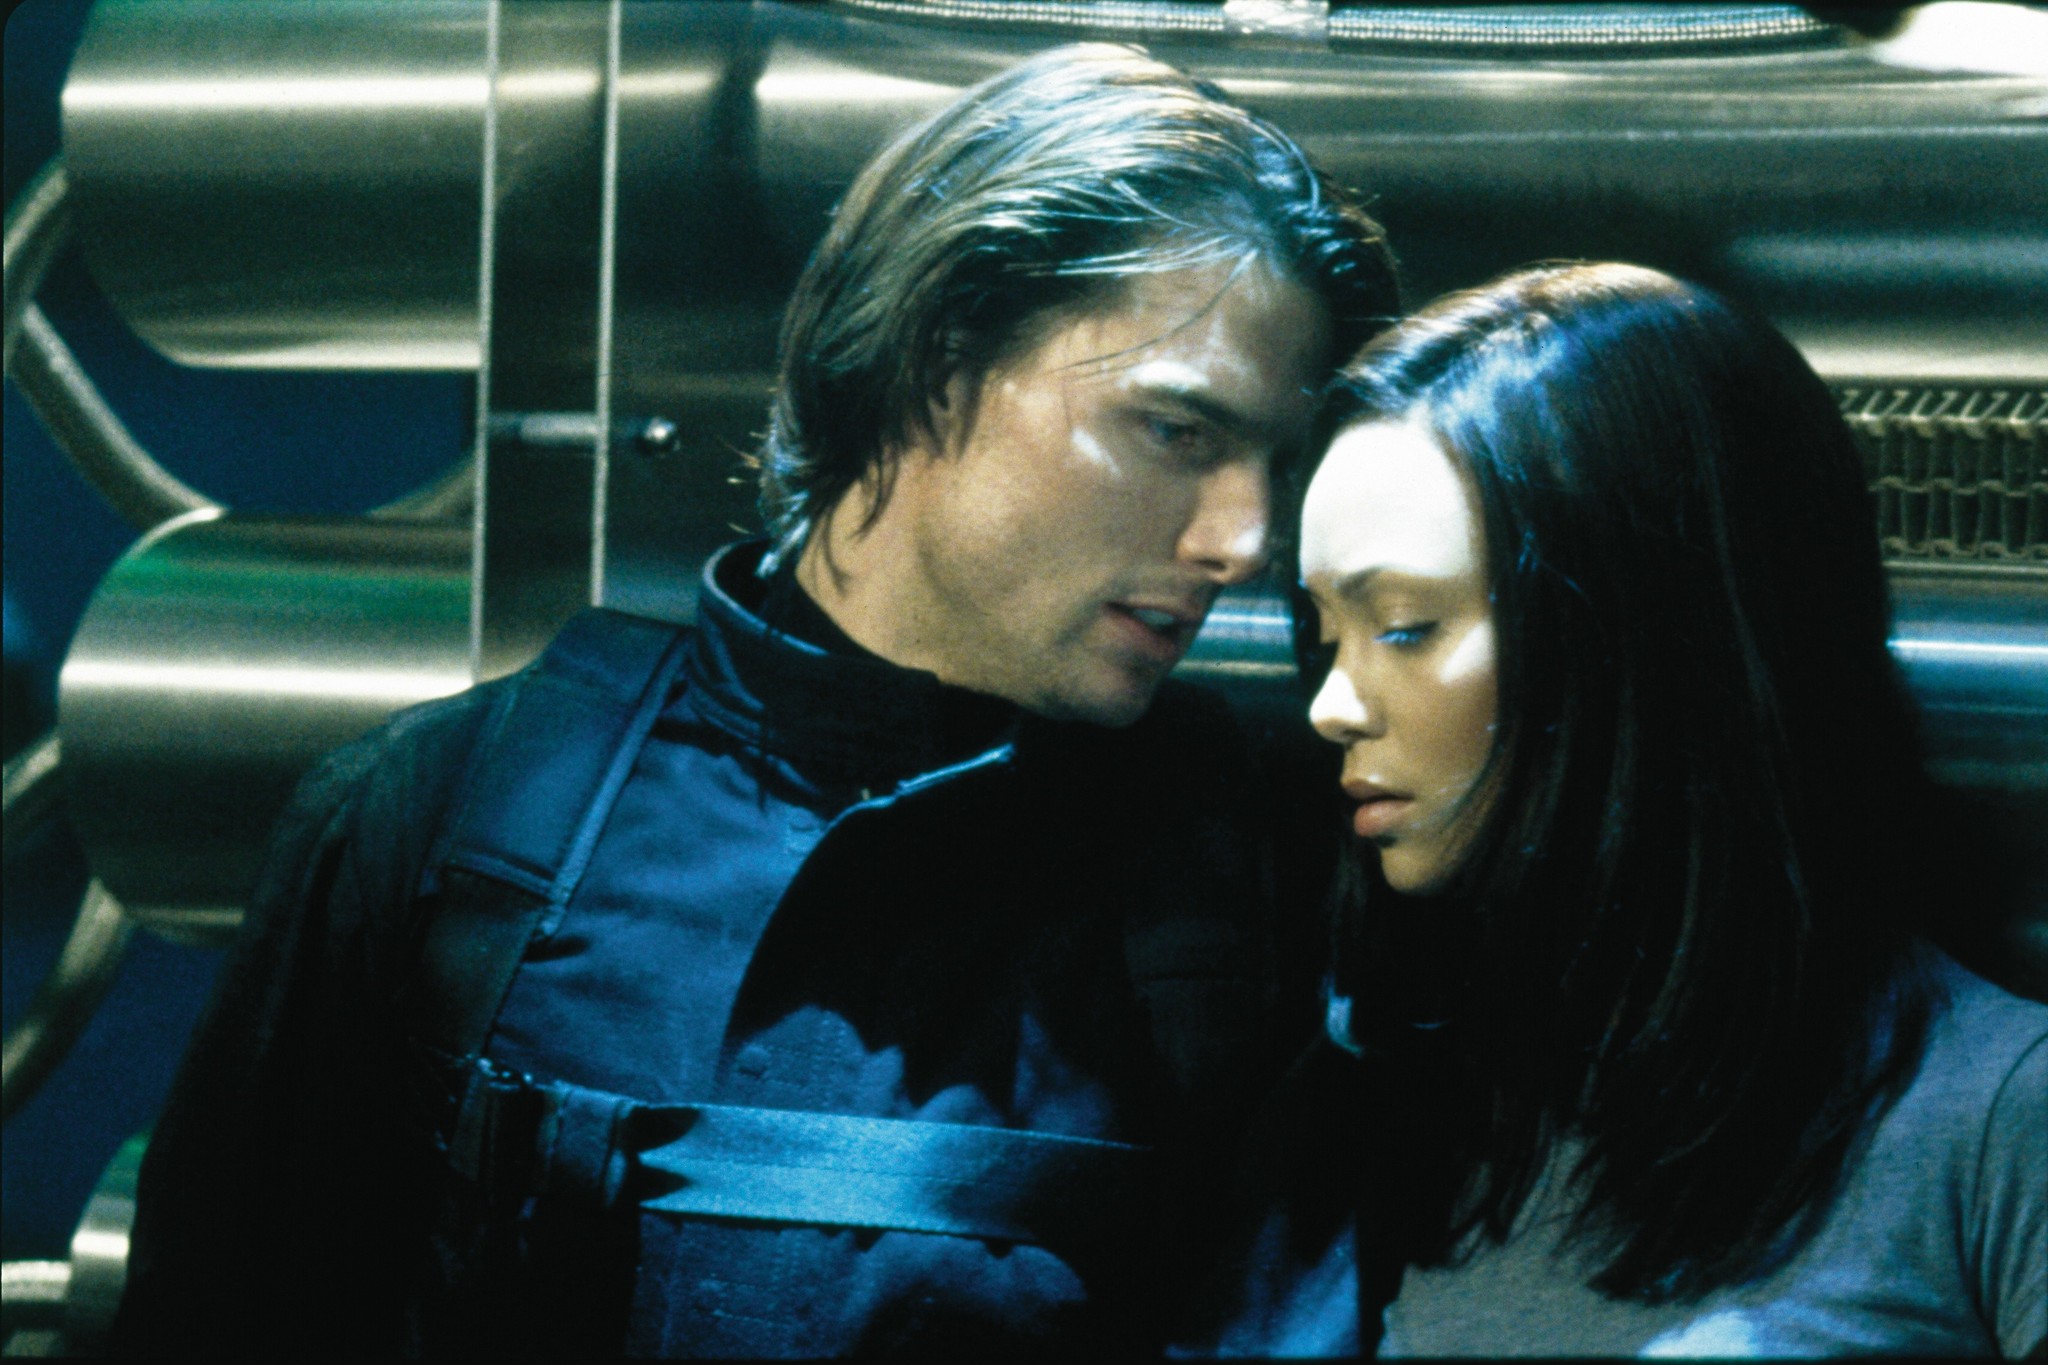 Still of Tom Cruise and Thandie Newton in Mission: Impossible II (2000)